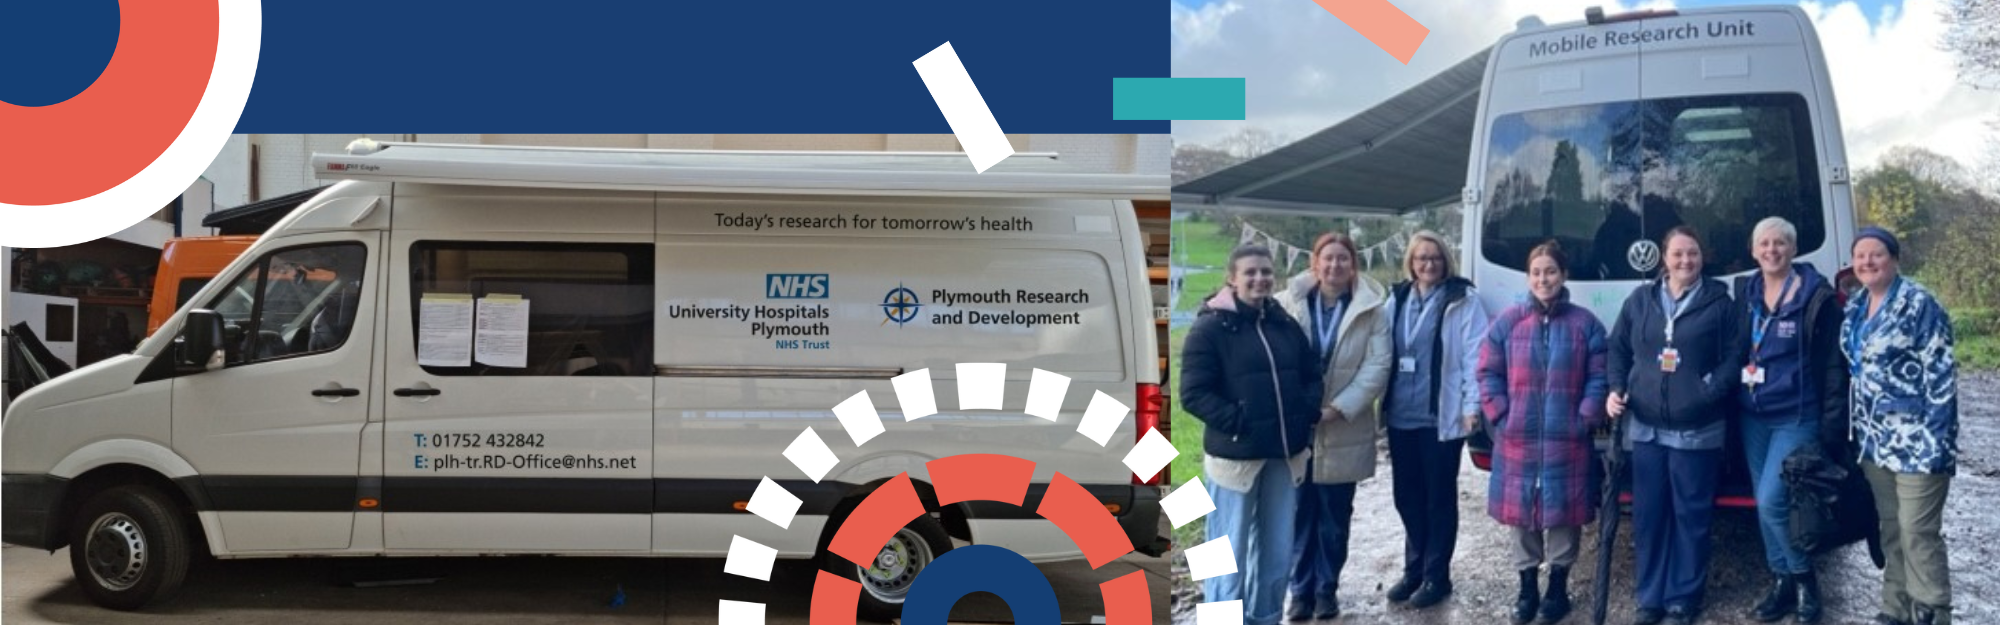 The Mobile Research Unit with staff from the CRN SWP and University Hospitals Plymouth NHS Trust